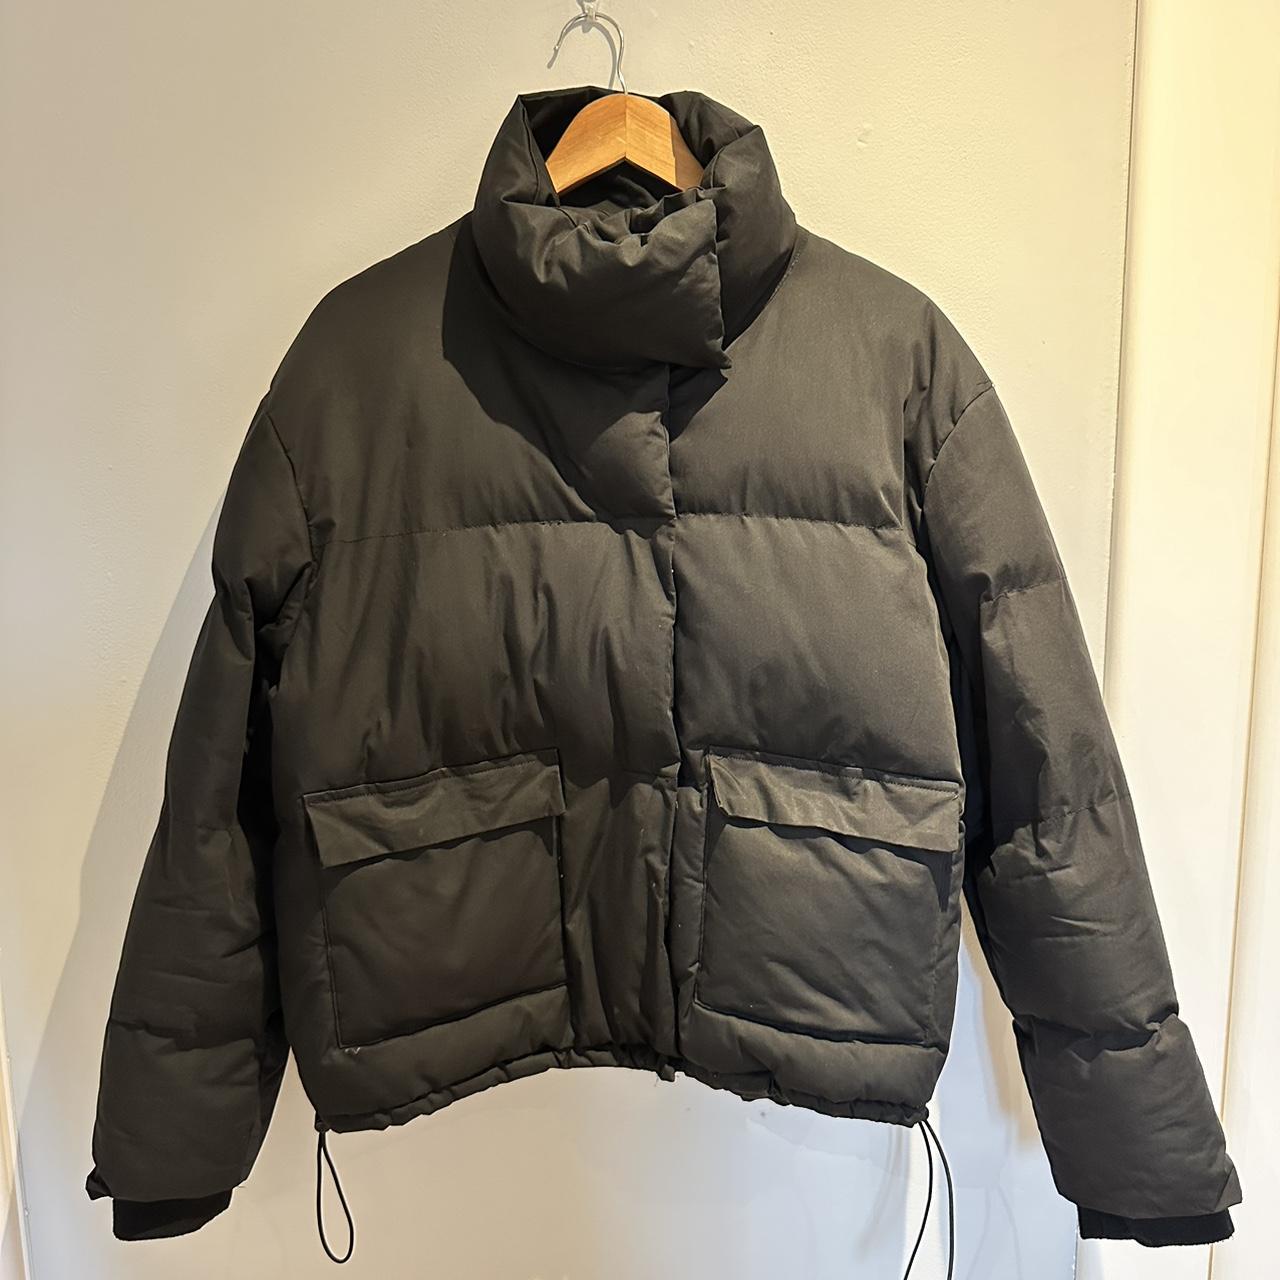 black oversized puffer size 8 would fit 6,8,10 - Depop